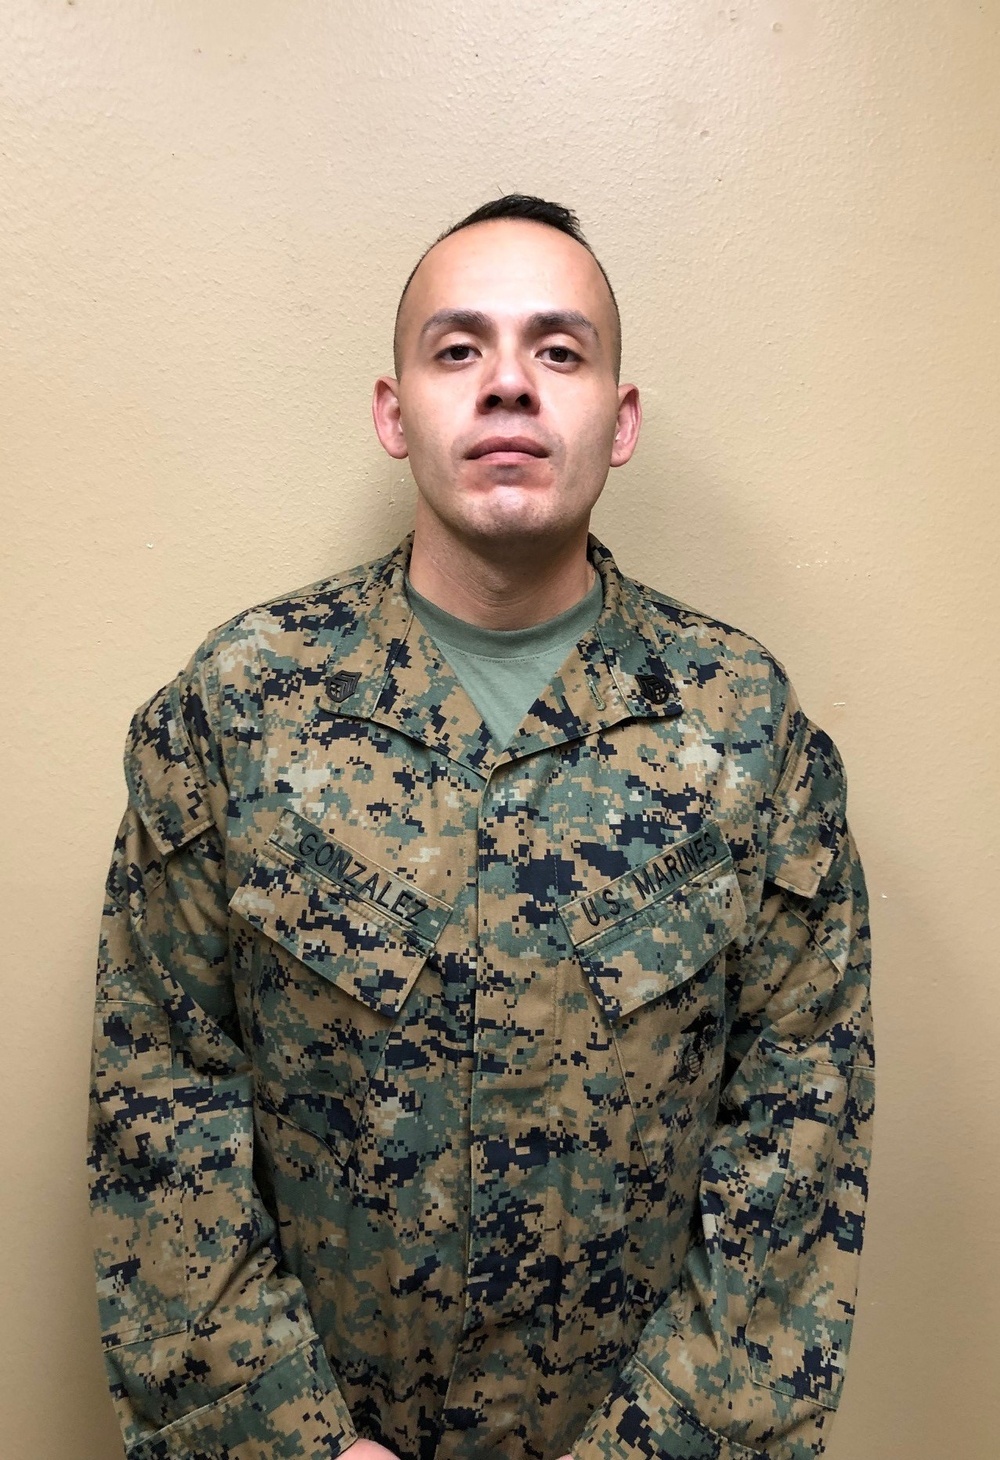 4th Marine Division Marines Recognized as Top Career Planners across Active Reserve Force Contributing to Marine Corps Talent Management Efforts